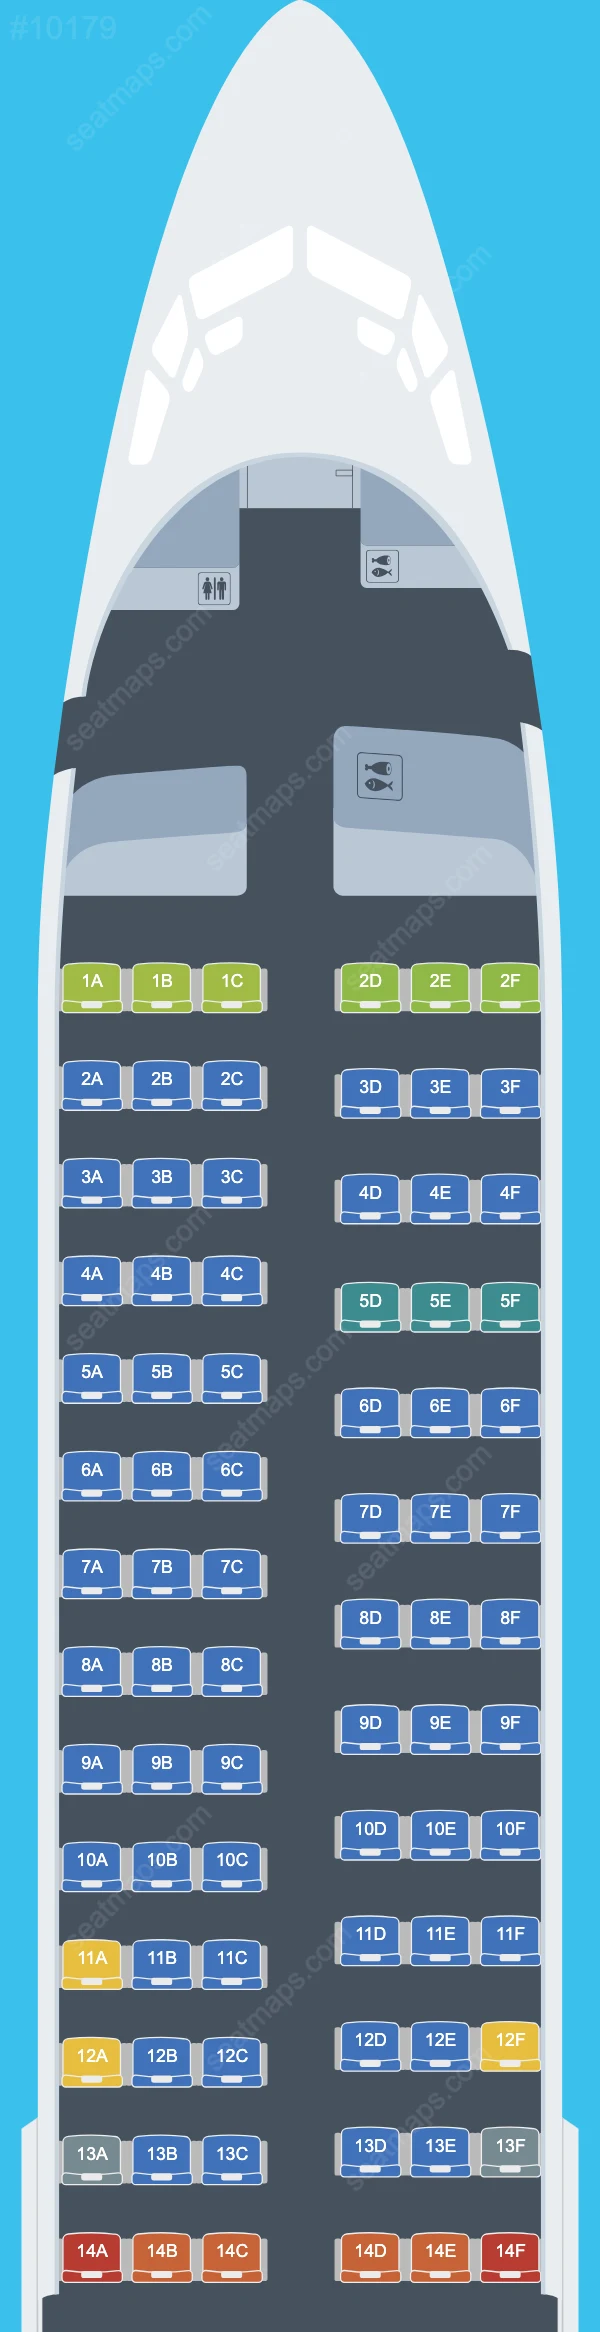 SkyUp Airlines Boeing 737 Seat Maps 737-800 V.2